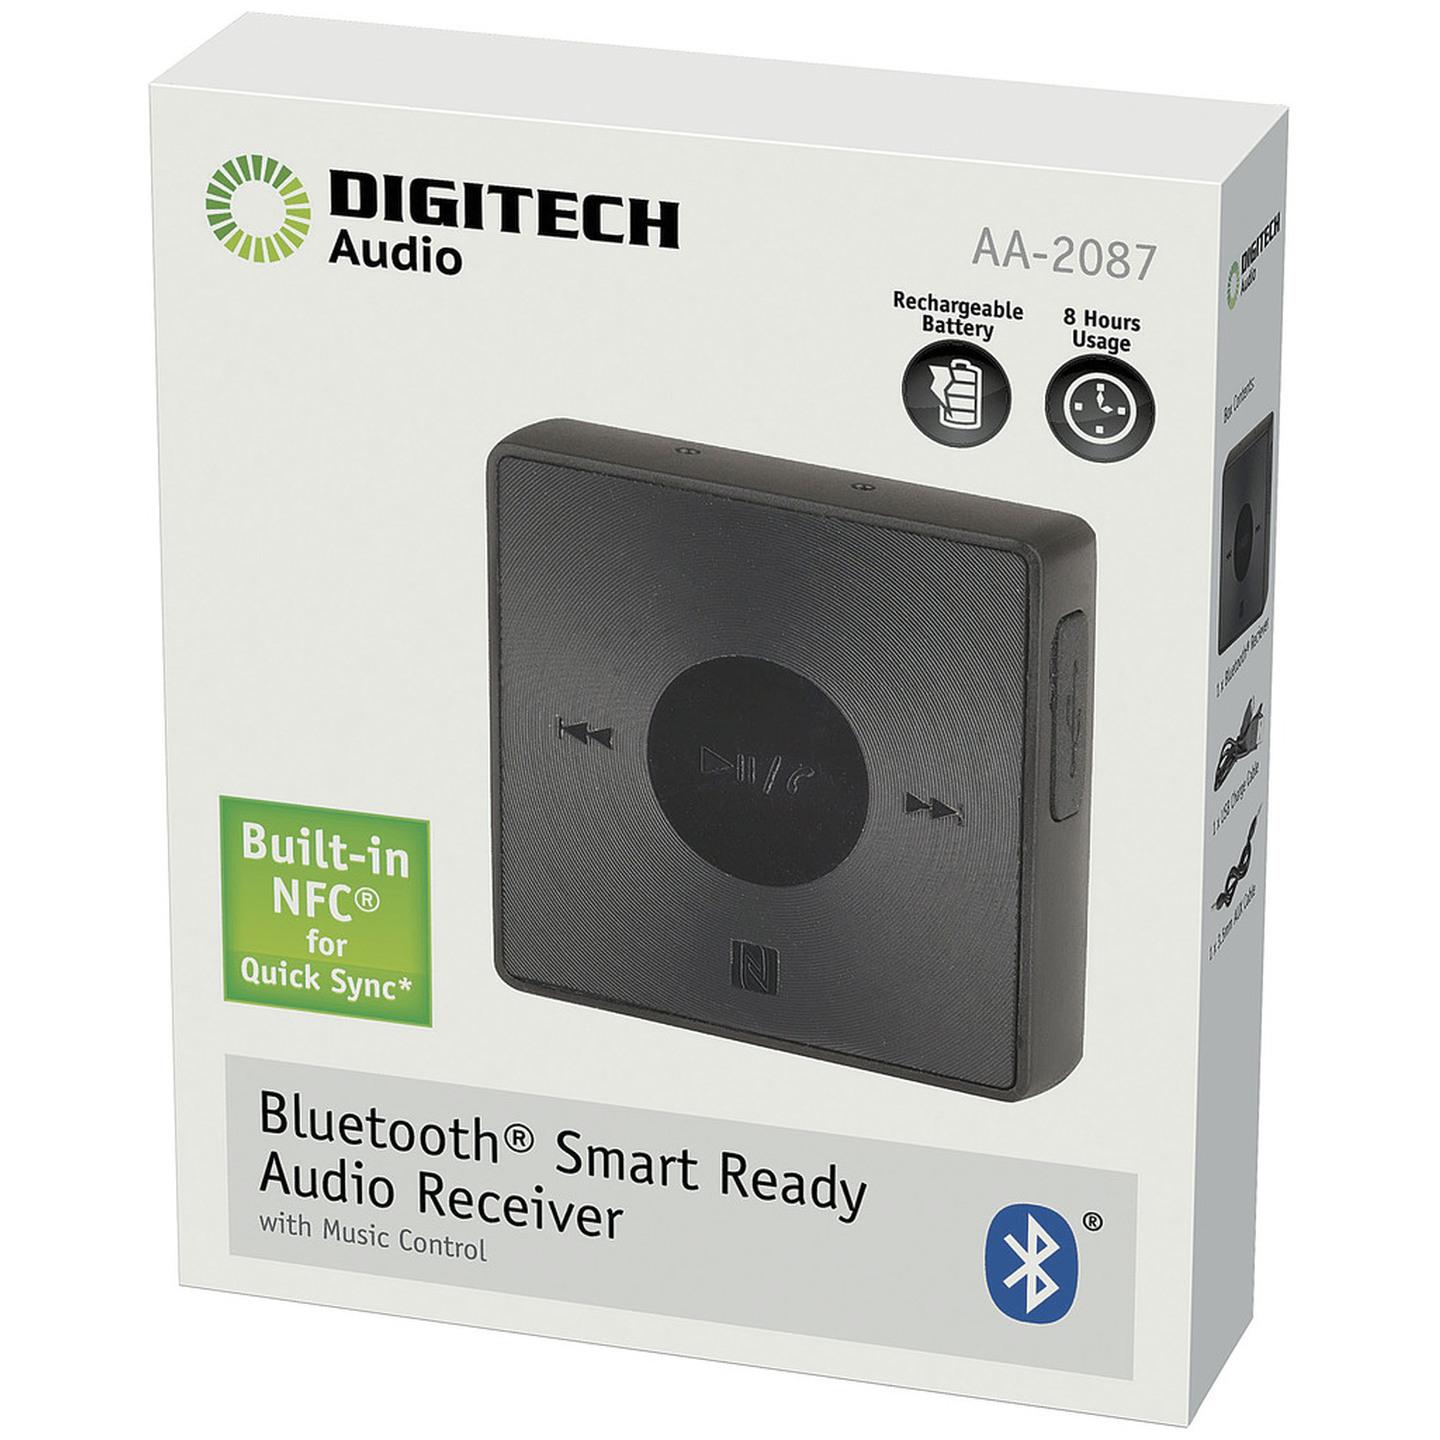 Digitech Bluetooth 4.0 Receiver with NFC and Music Control